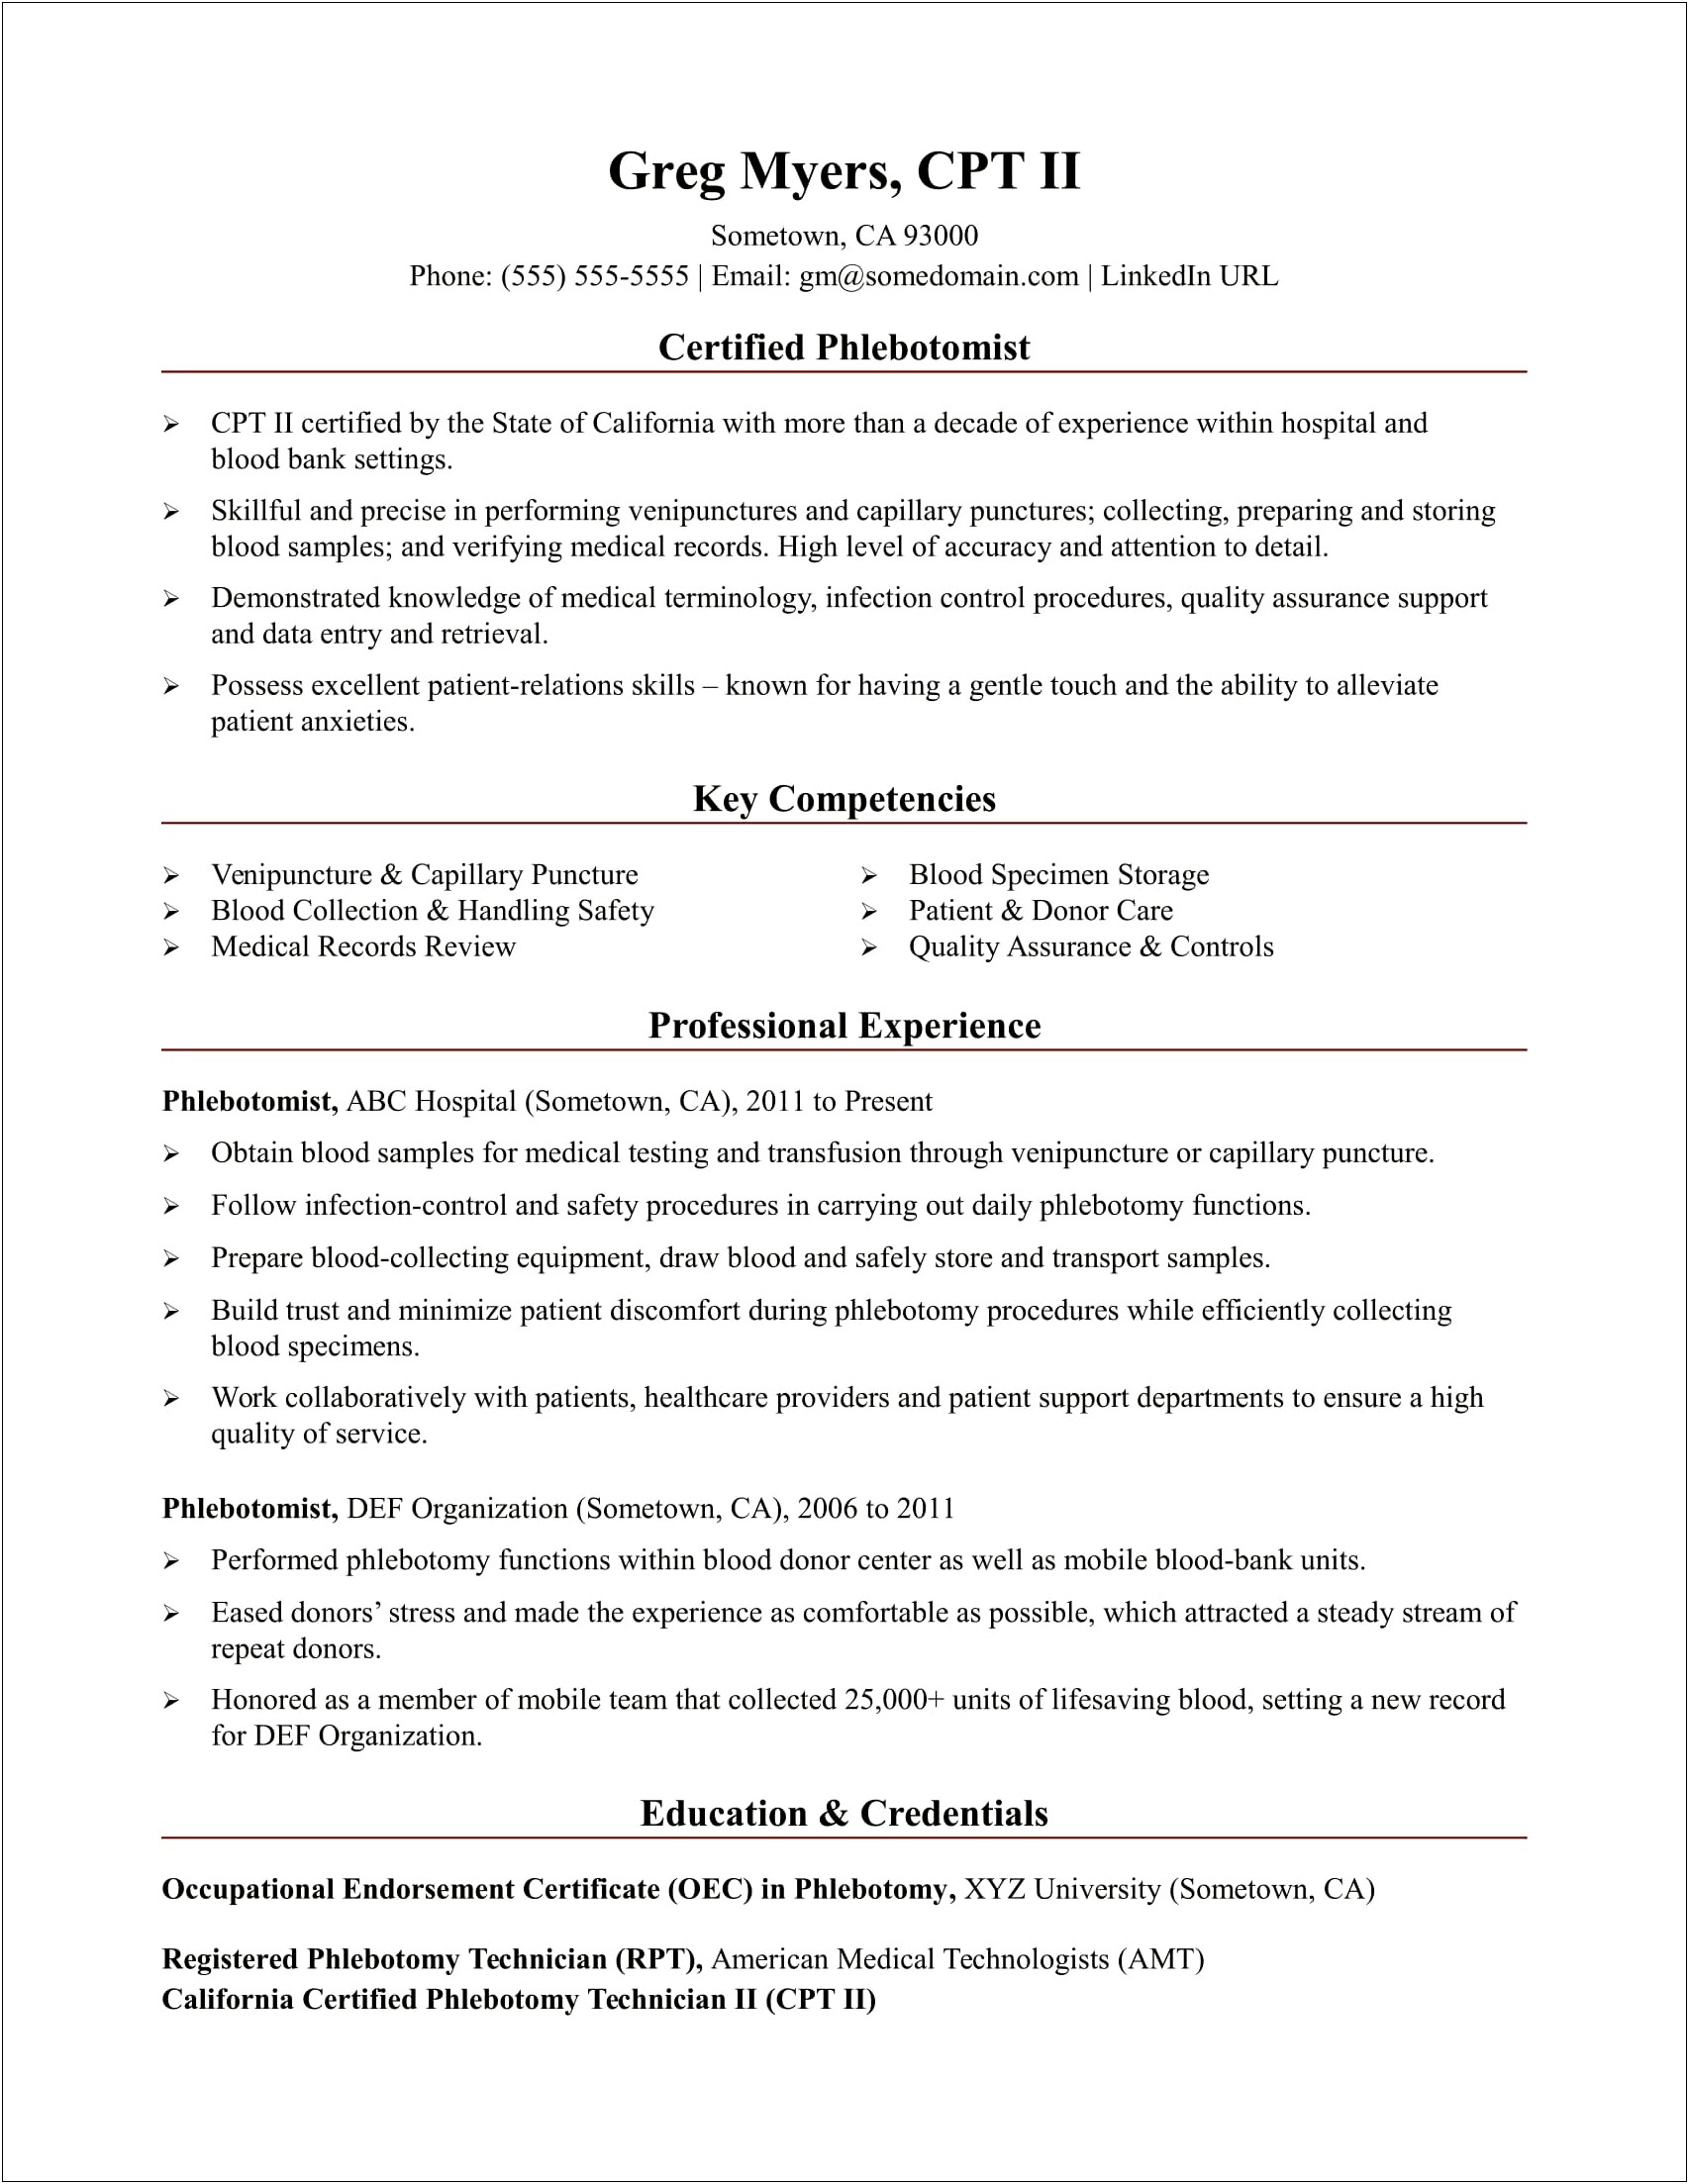 Example Of A Resume Transporter In A Hospital